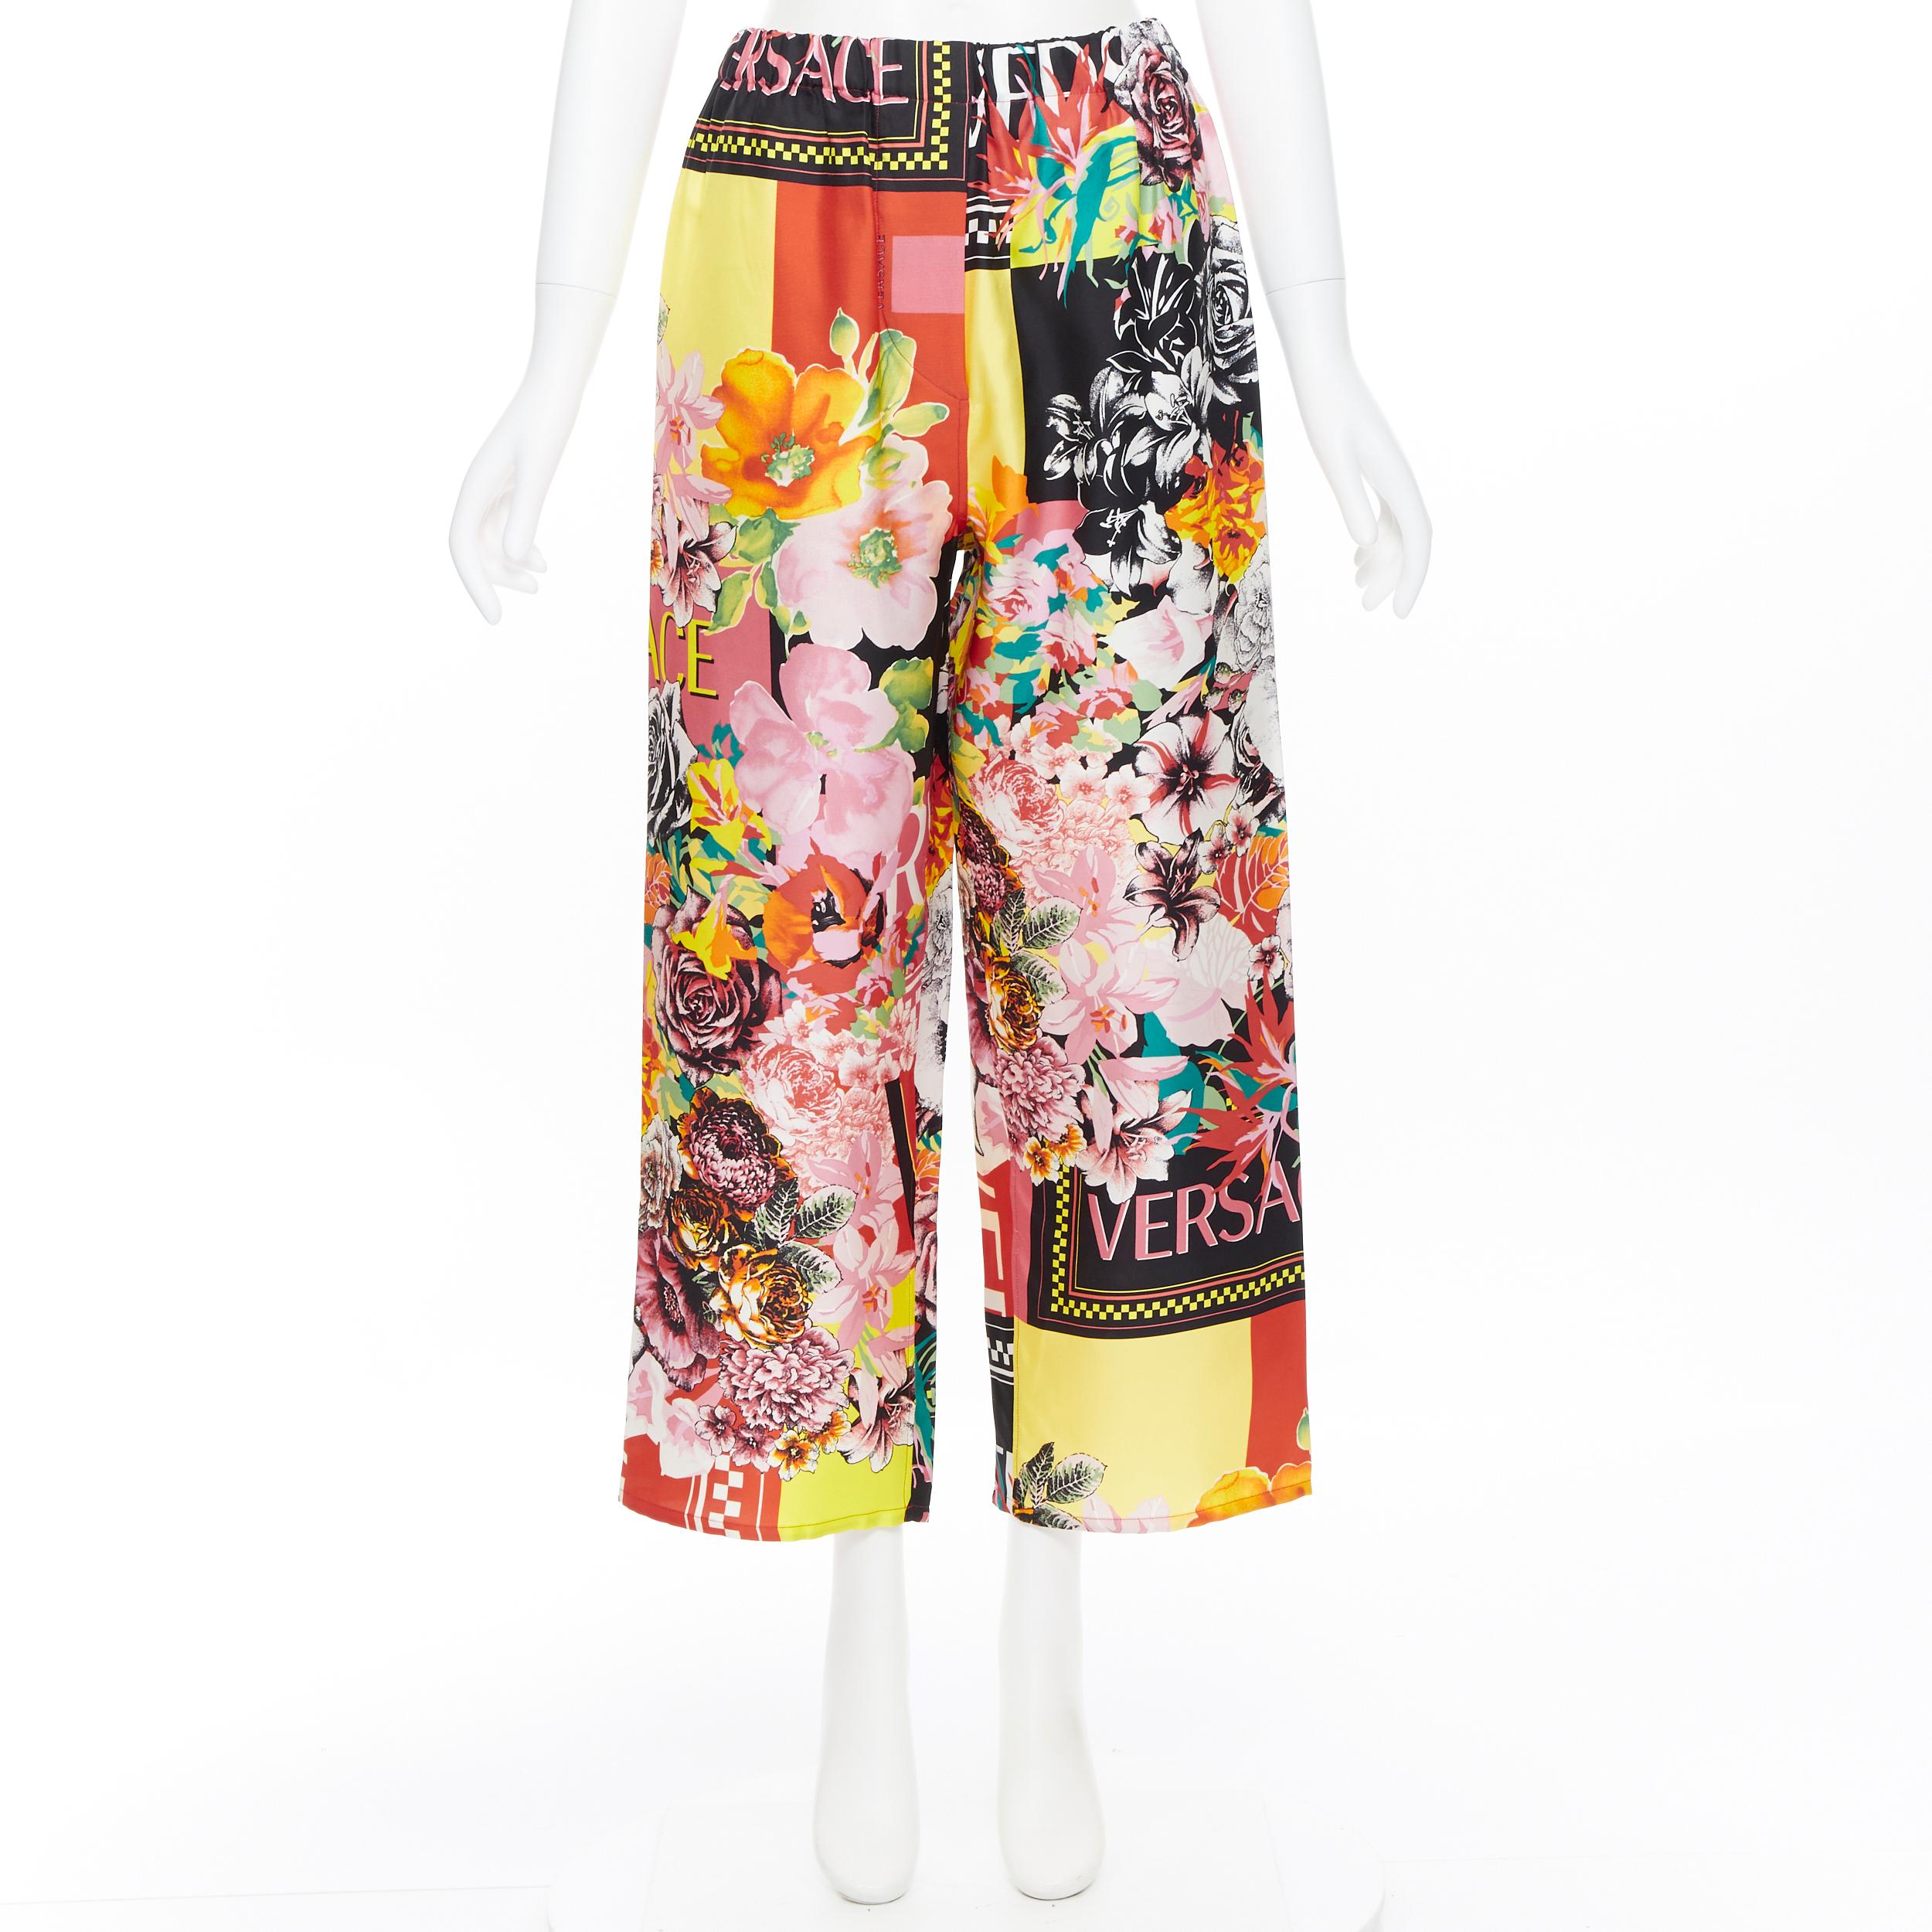 new VERSACE 100% silk SS19 floral flower box logo print casual pants IT44 L
Brand: Versace
Designer: Donatella Versace
Collection: SS19 Runway Print
Model Name / Style: Silk pants
Material: Silk
Color: Multicolour
Pattern: Floral
Extra Detail: